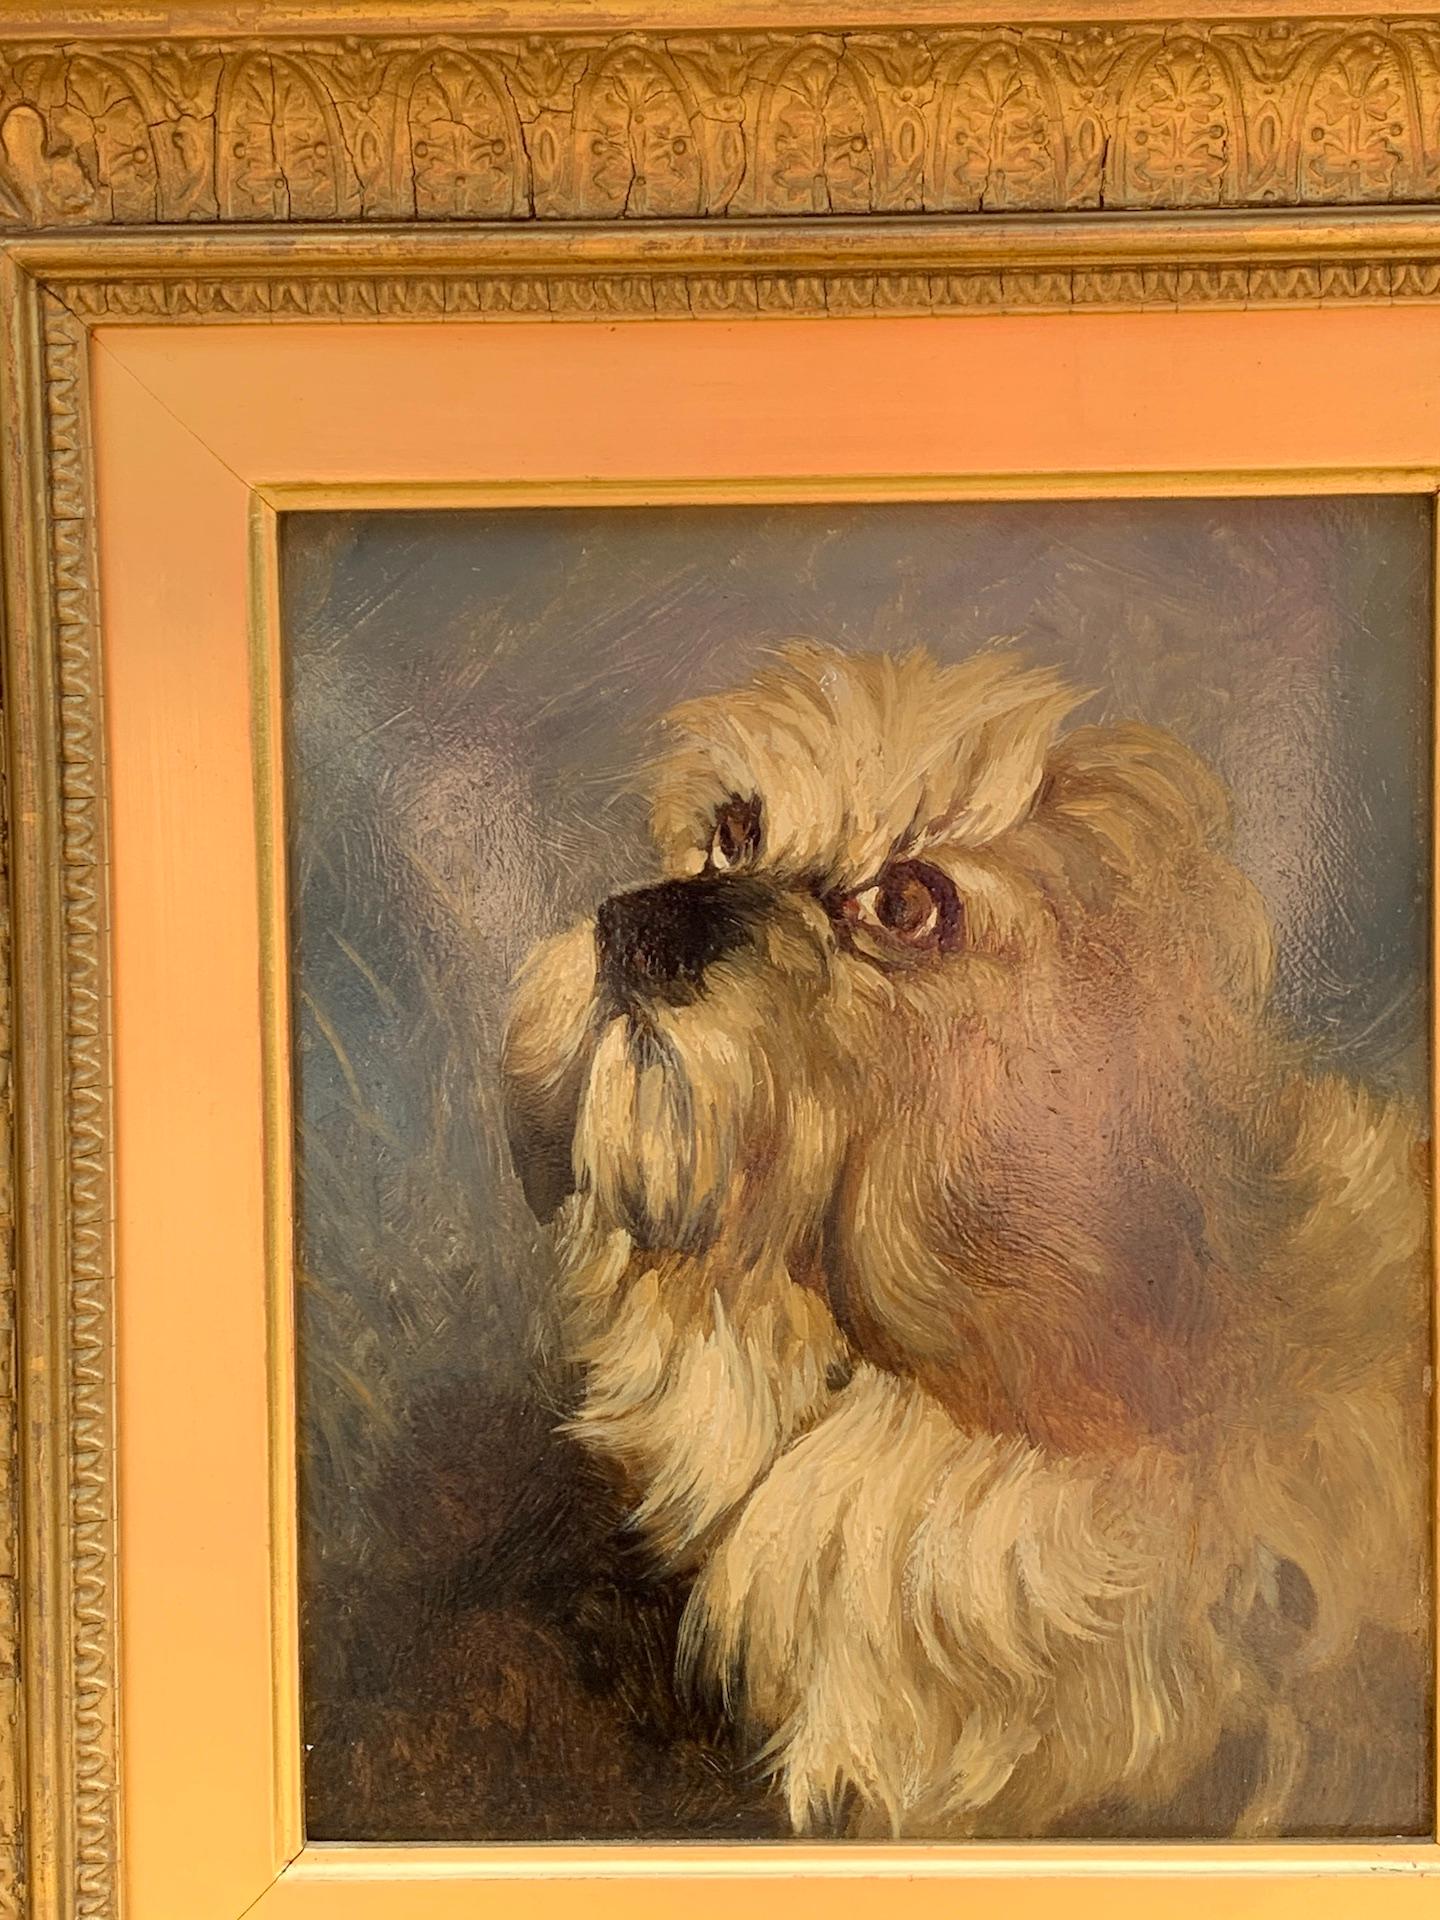 19th century English dog portrait of a Dandie Dinmont Terrier looking up  - Painting by George Earl